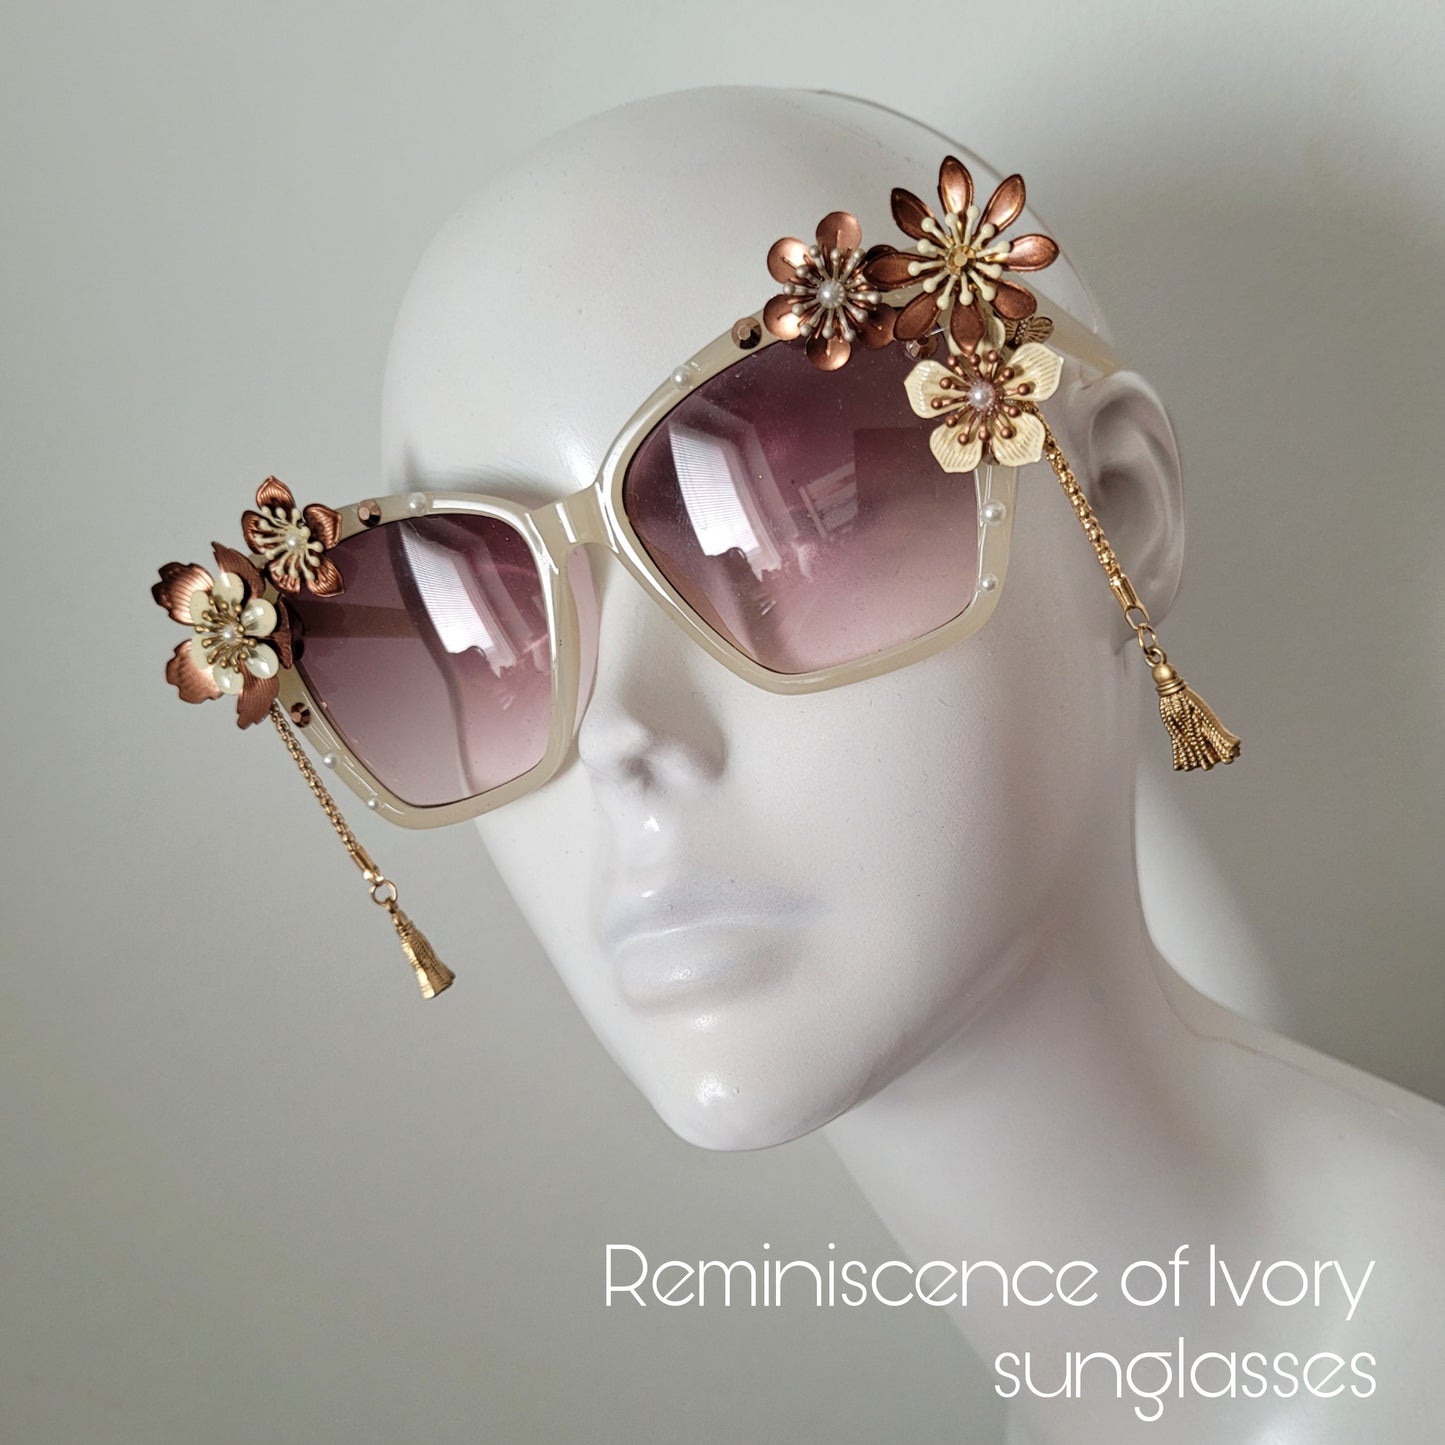 Dreams in Ivory collection: The Reminiscence of Ivory Sunglasses